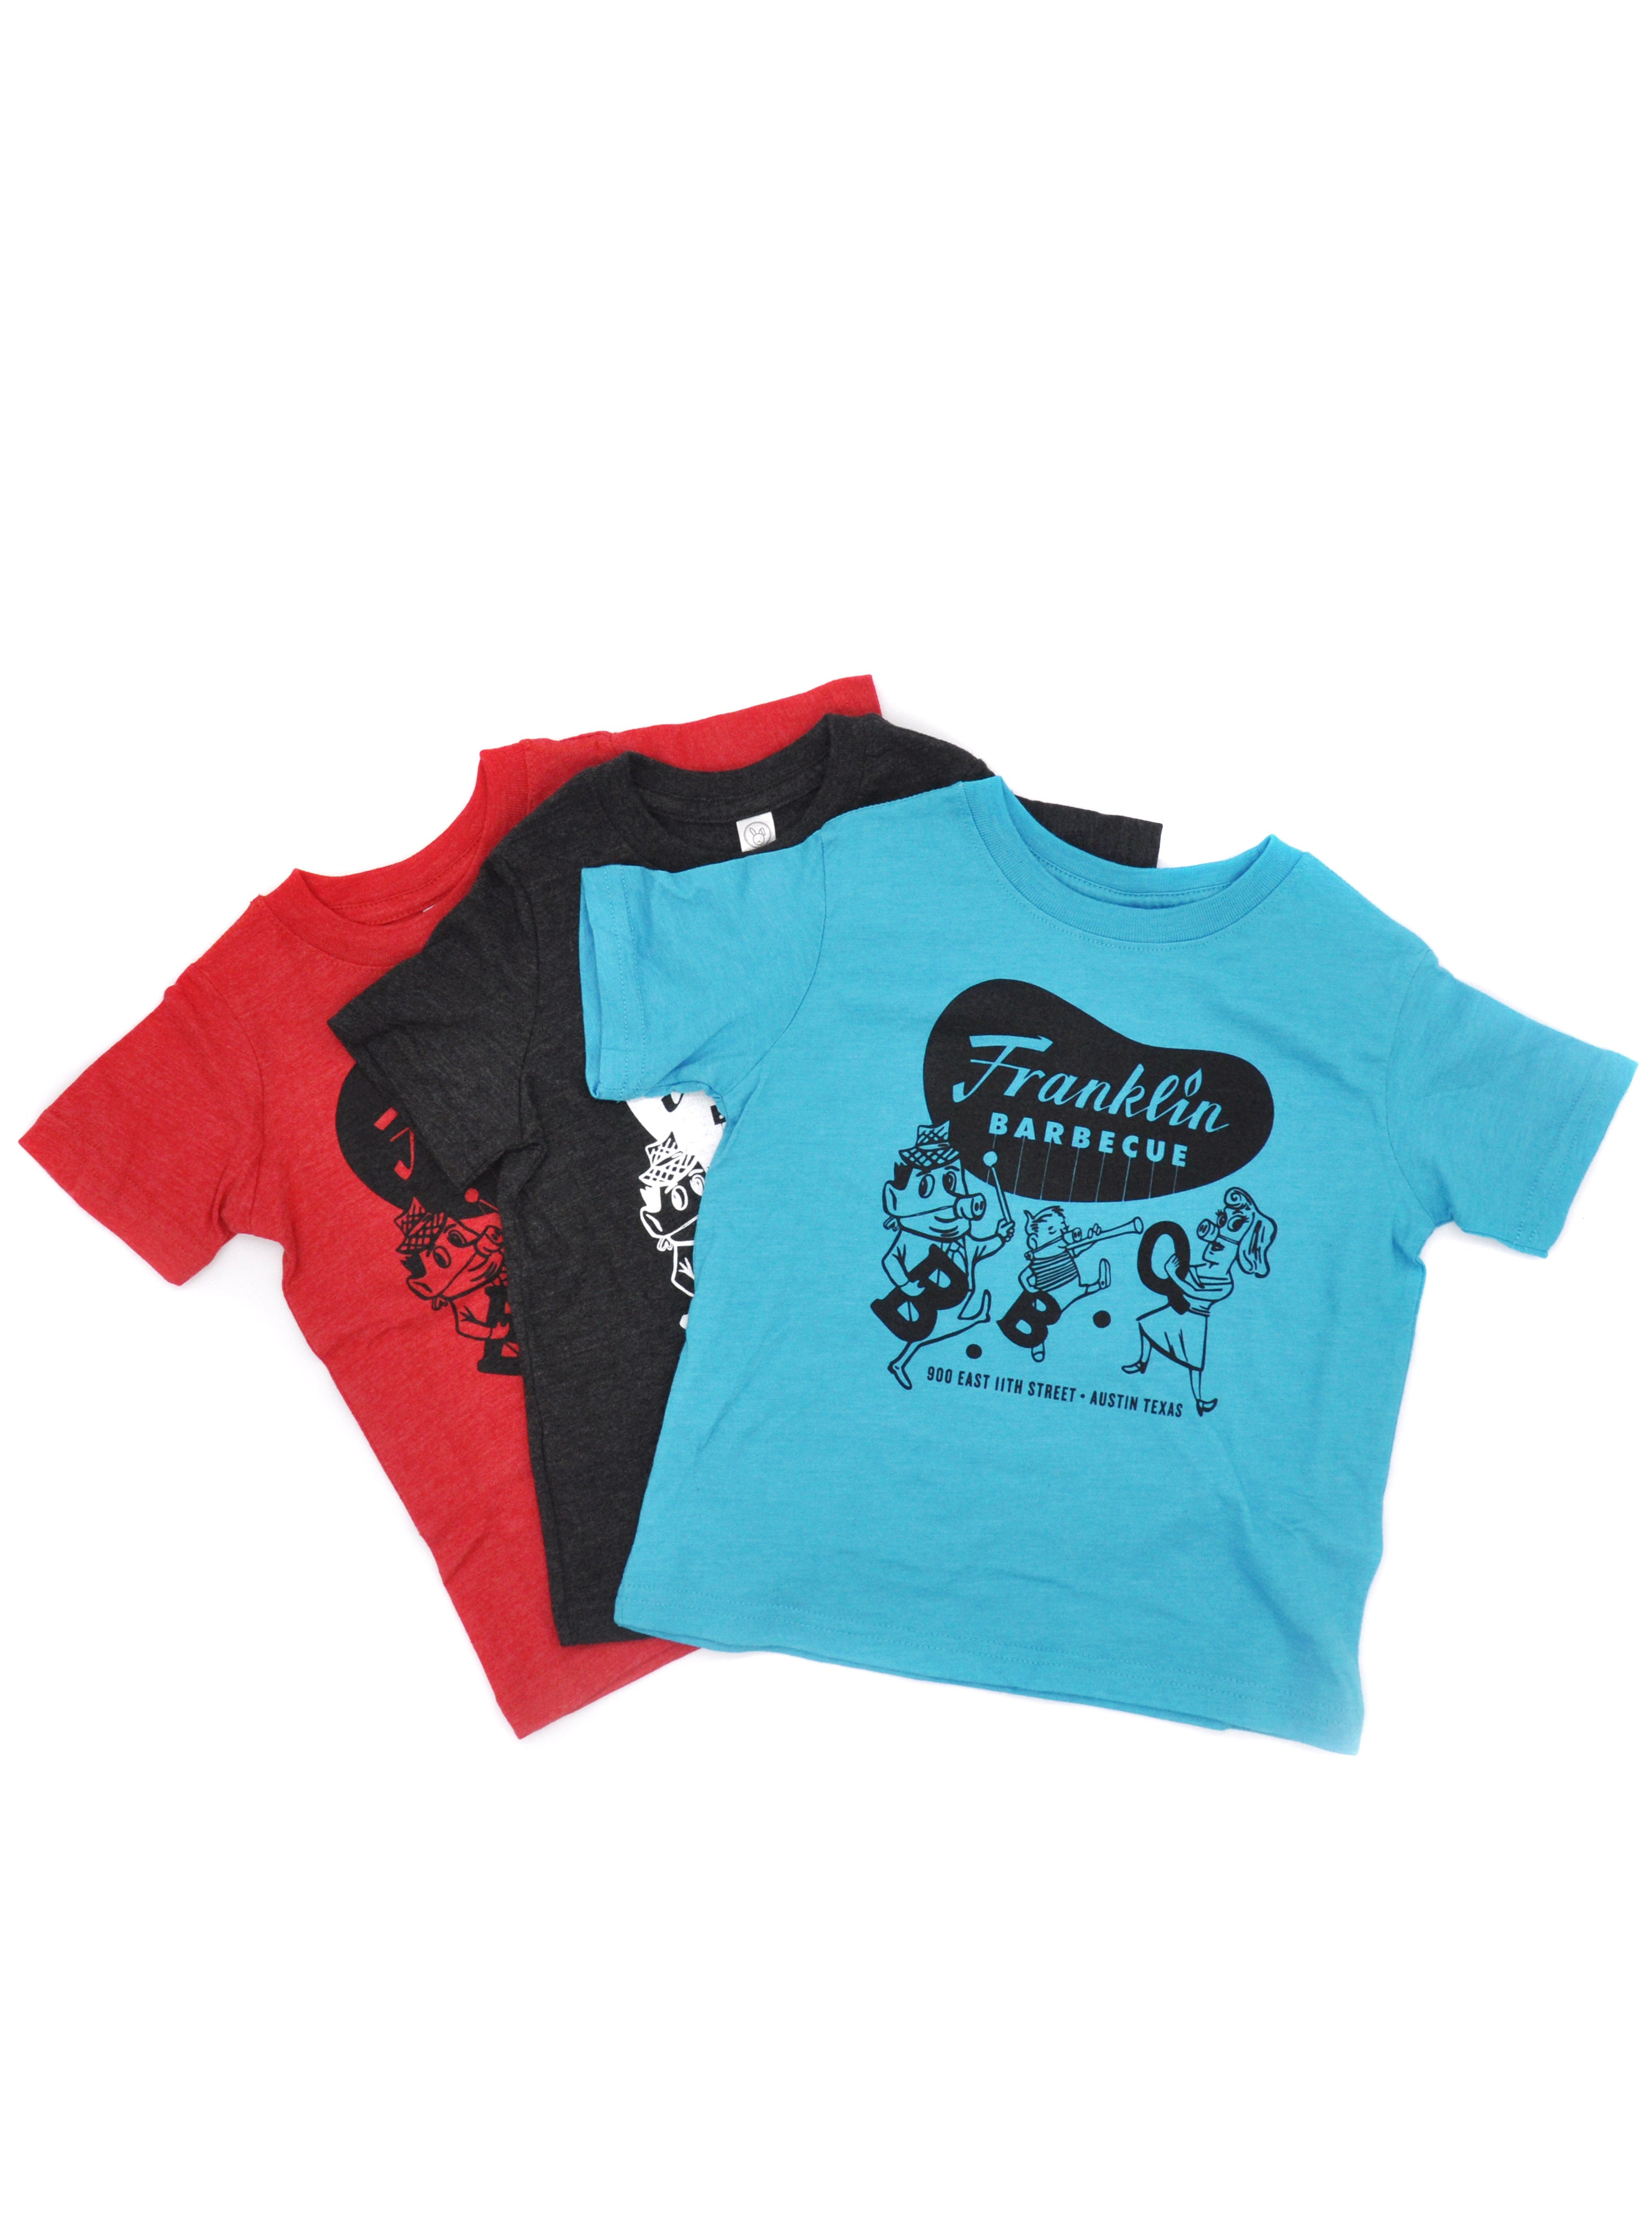 Franklin Barbecue kids t-shirts shown in red, grey, and teal.